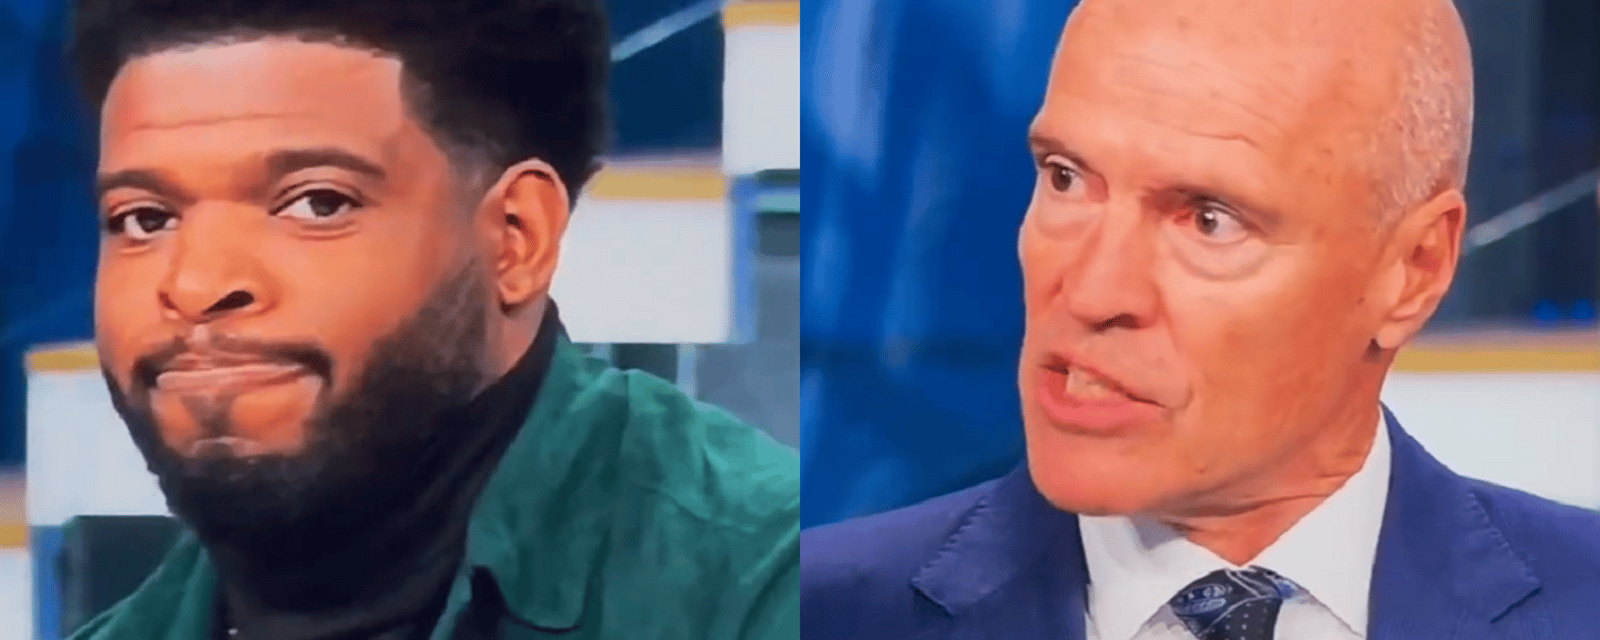 P.K. Subban and Mark Messier clash over “cheap hit” on Saturday.